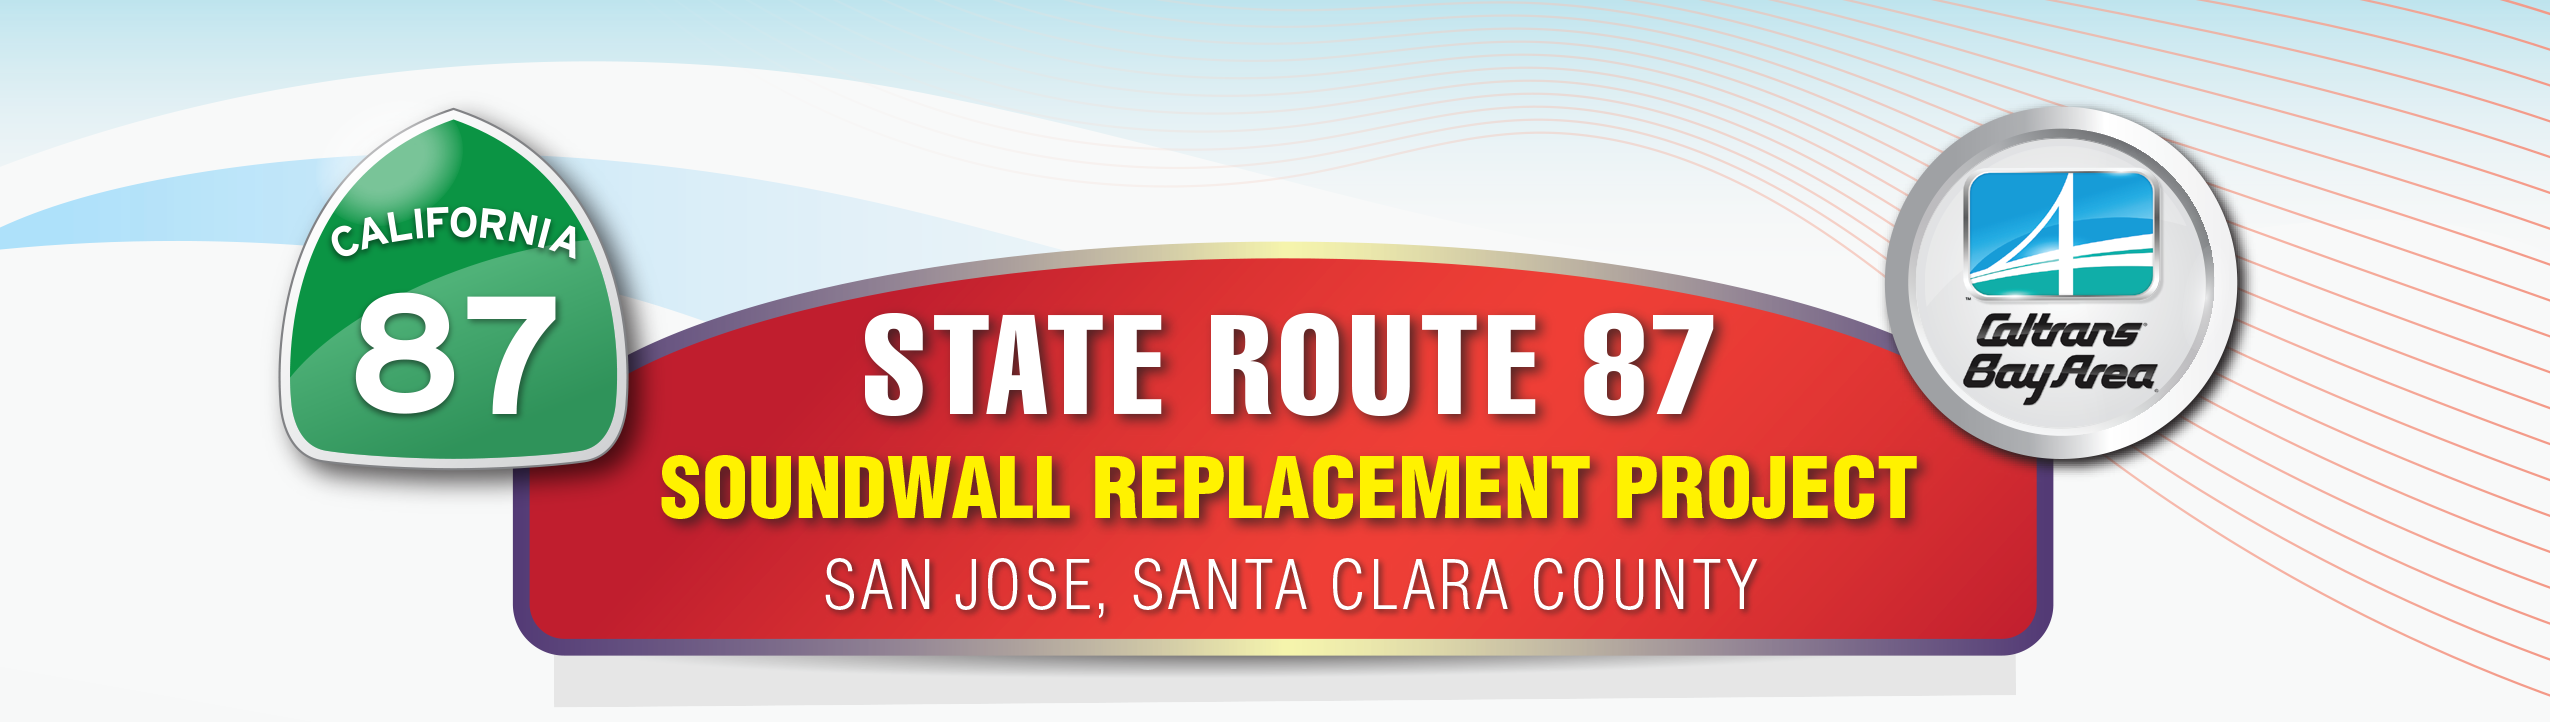 State Route 87 Soundwall Replacement Project San Jose, Santa Clara County header